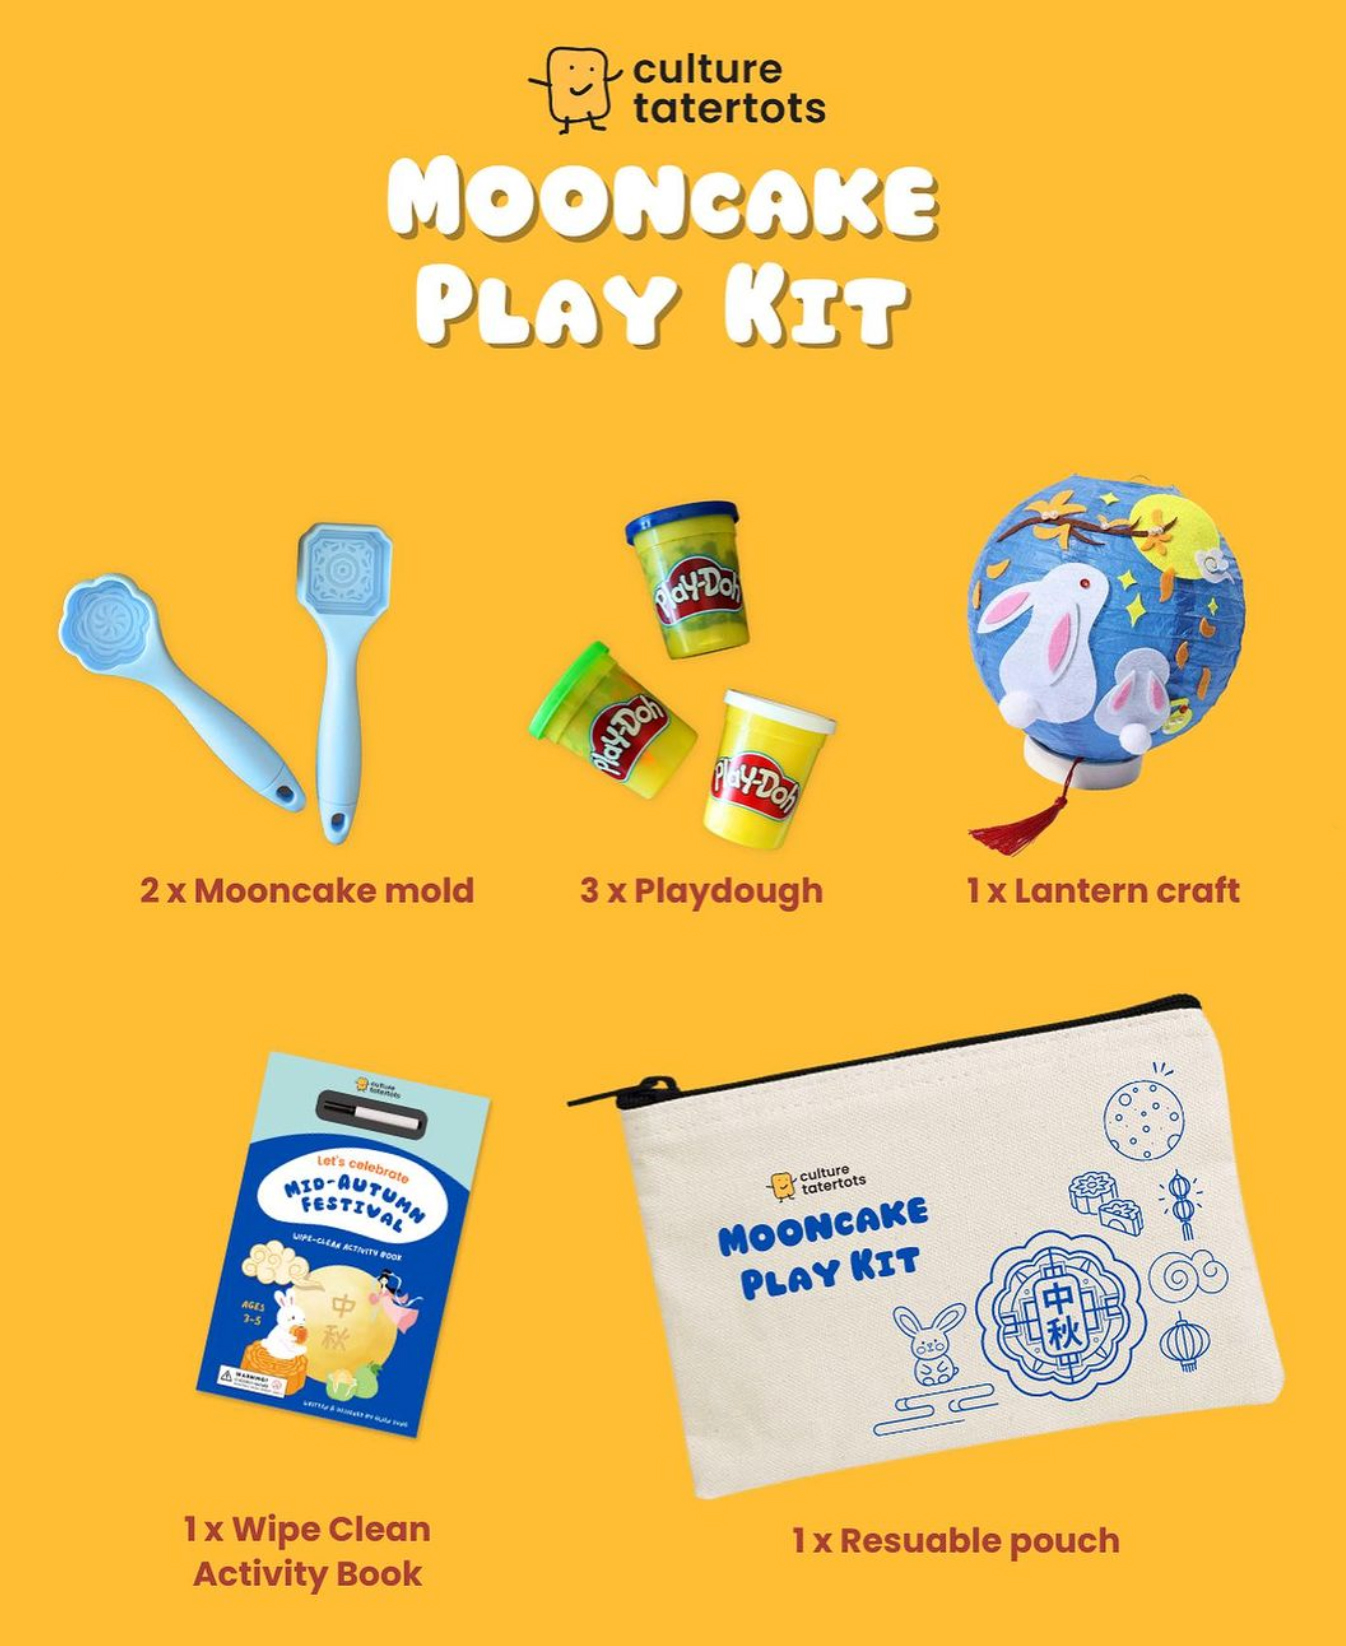 Contents of the Mooncake play kit on yellow background.